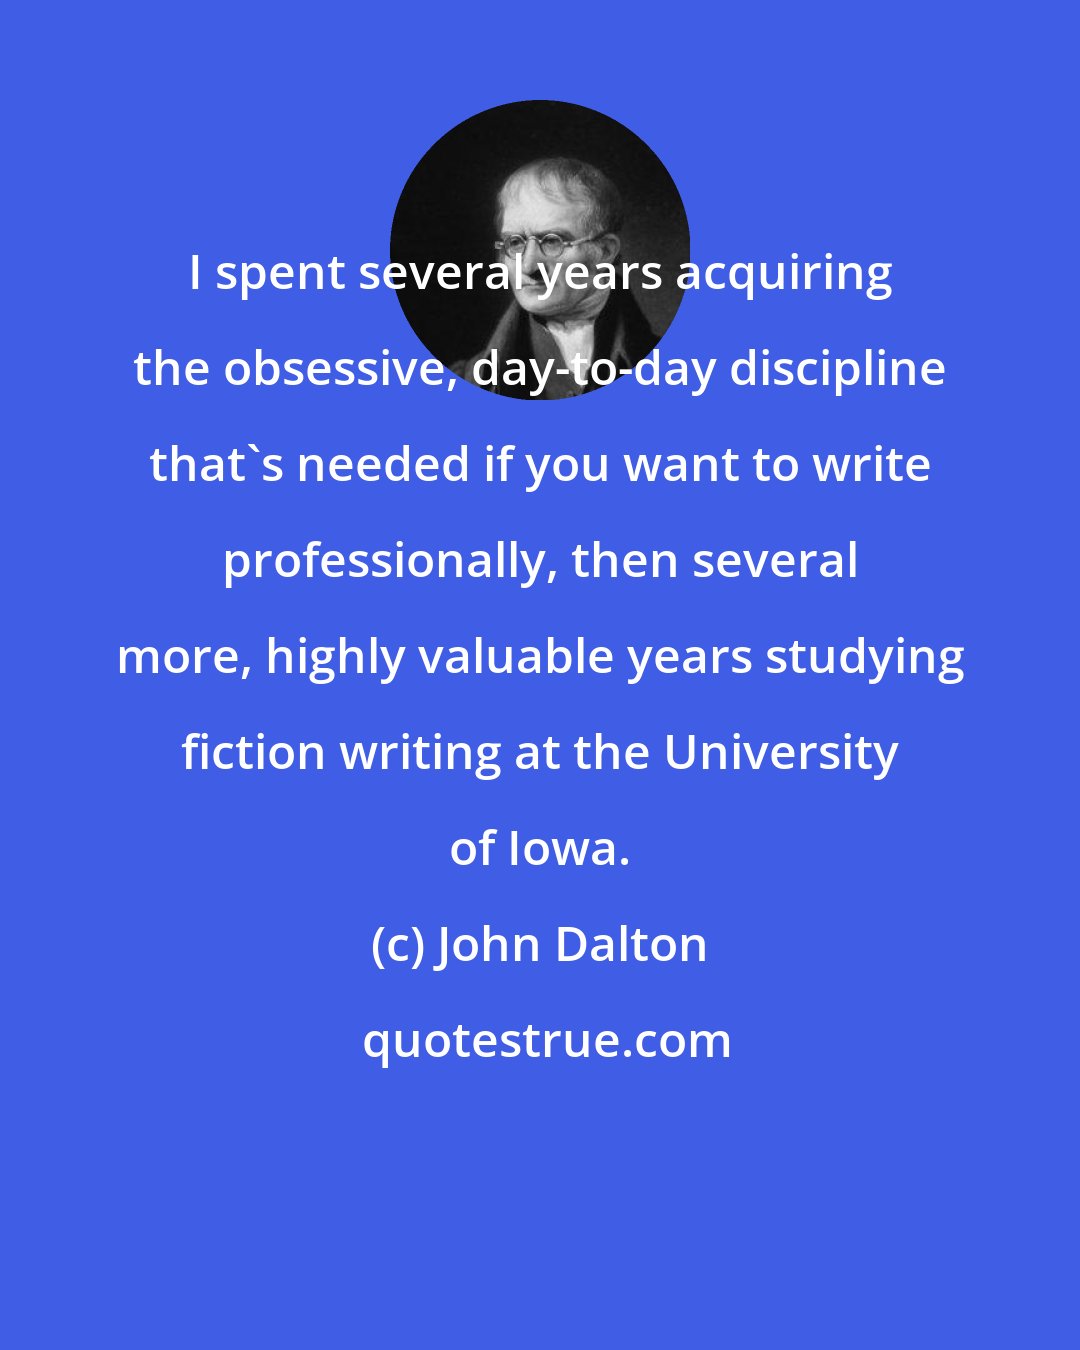 John Dalton: I spent several years acquiring the obsessive, day-to-day discipline that's needed if you want to write professionally, then several more, highly valuable years studying fiction writing at the University of Iowa.